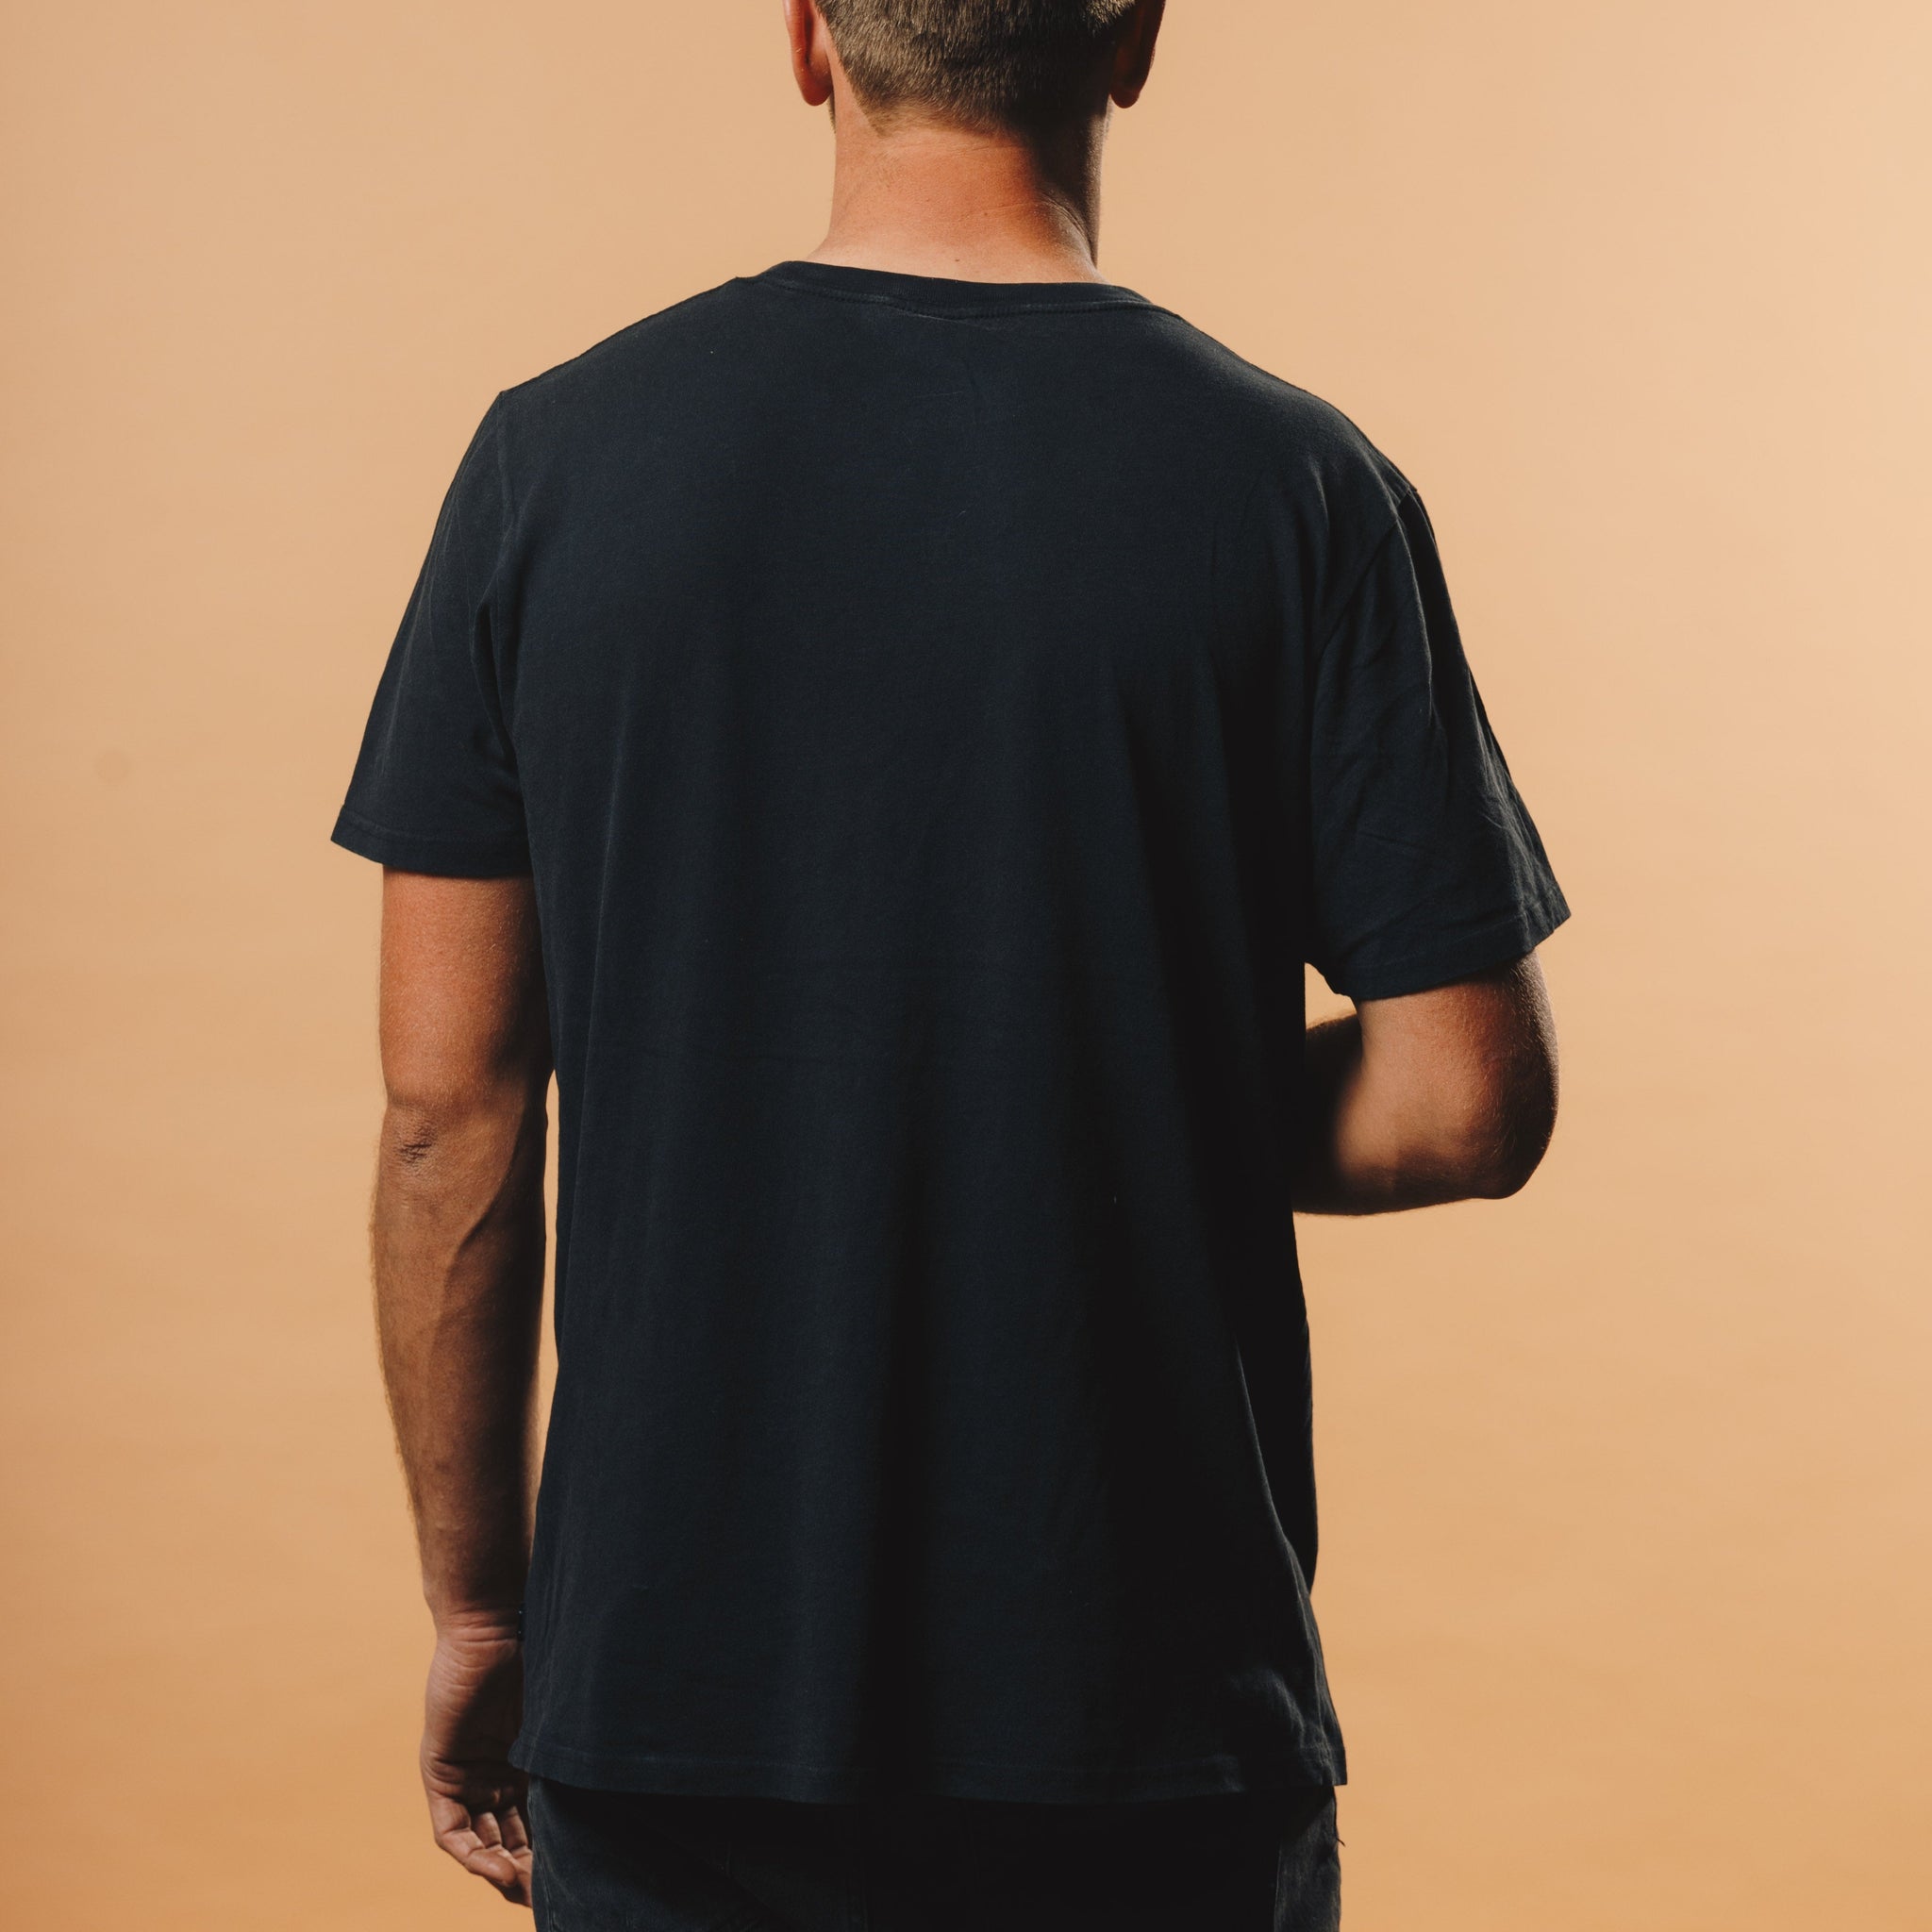 The Everyday Off-Black Tee back view - Better Beer